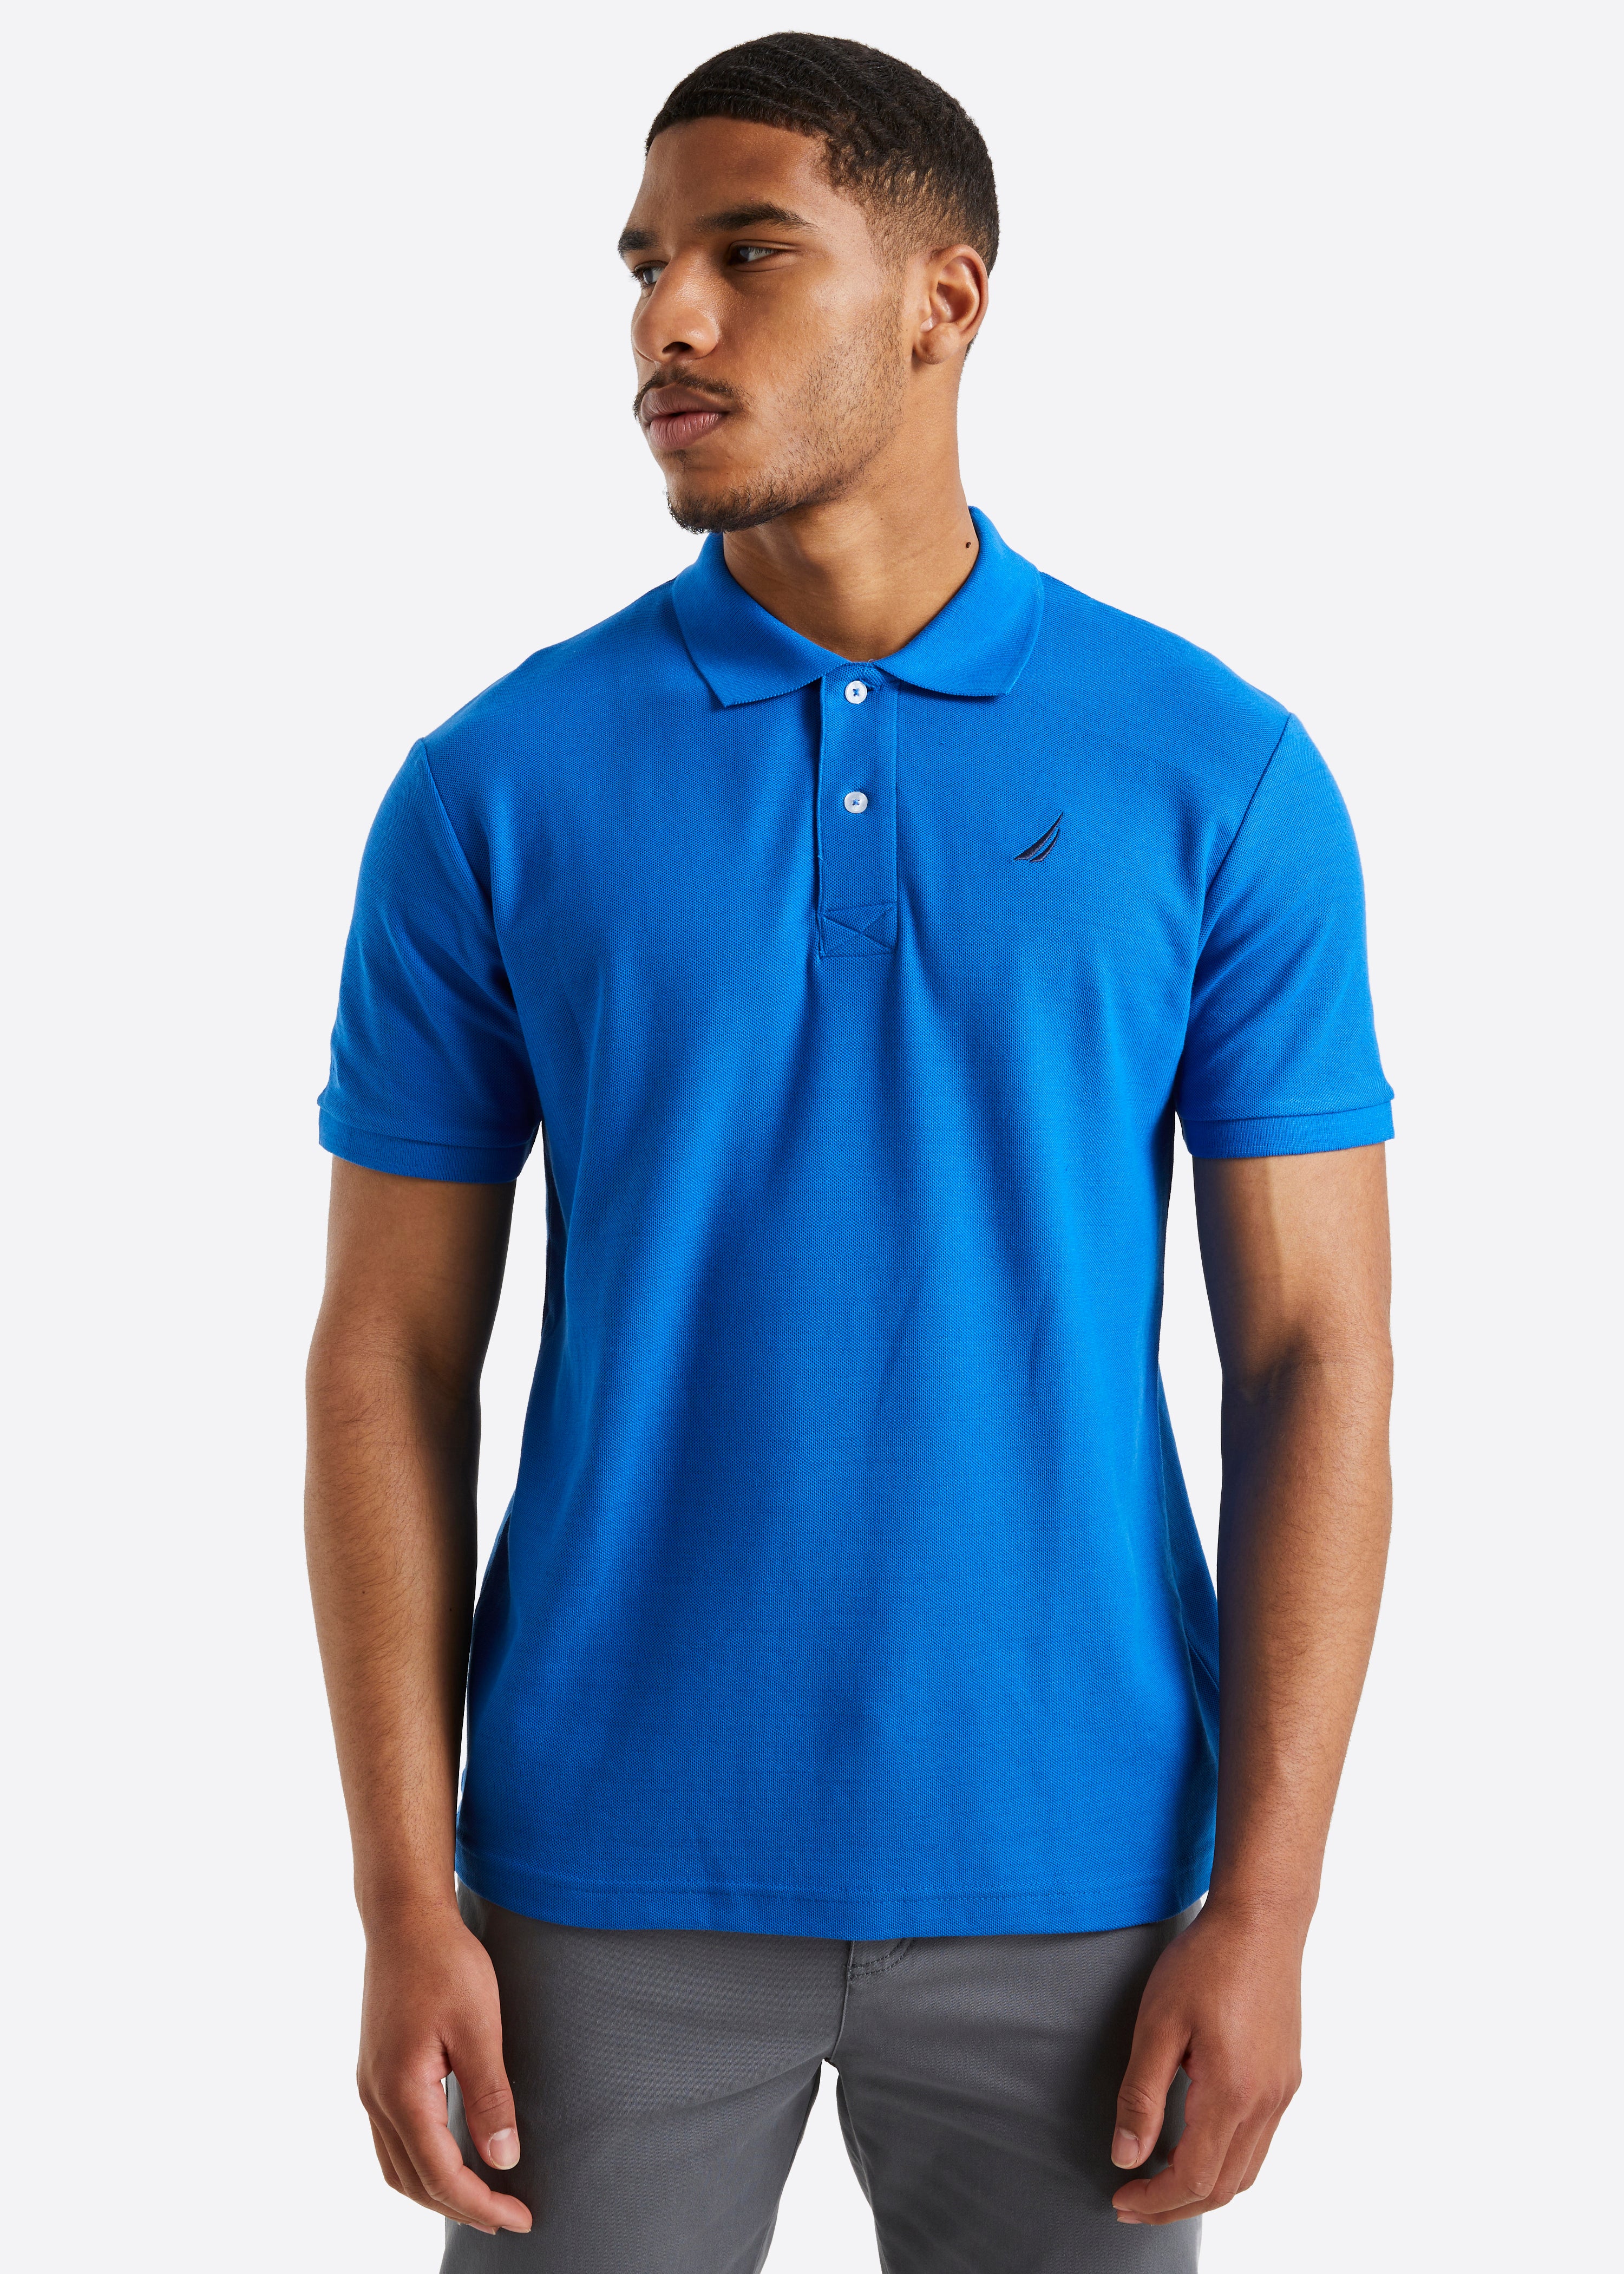 Your Factory Outlet- Mens Polo shirt- £5.00